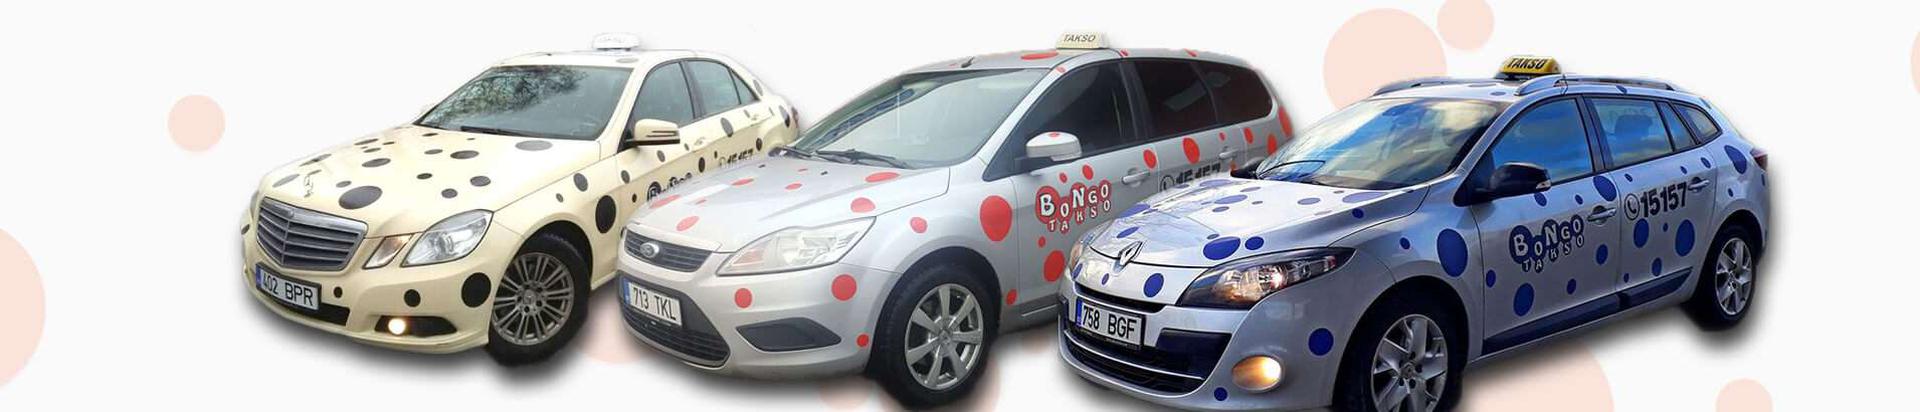 Taxi transport and other related services, products, consultations